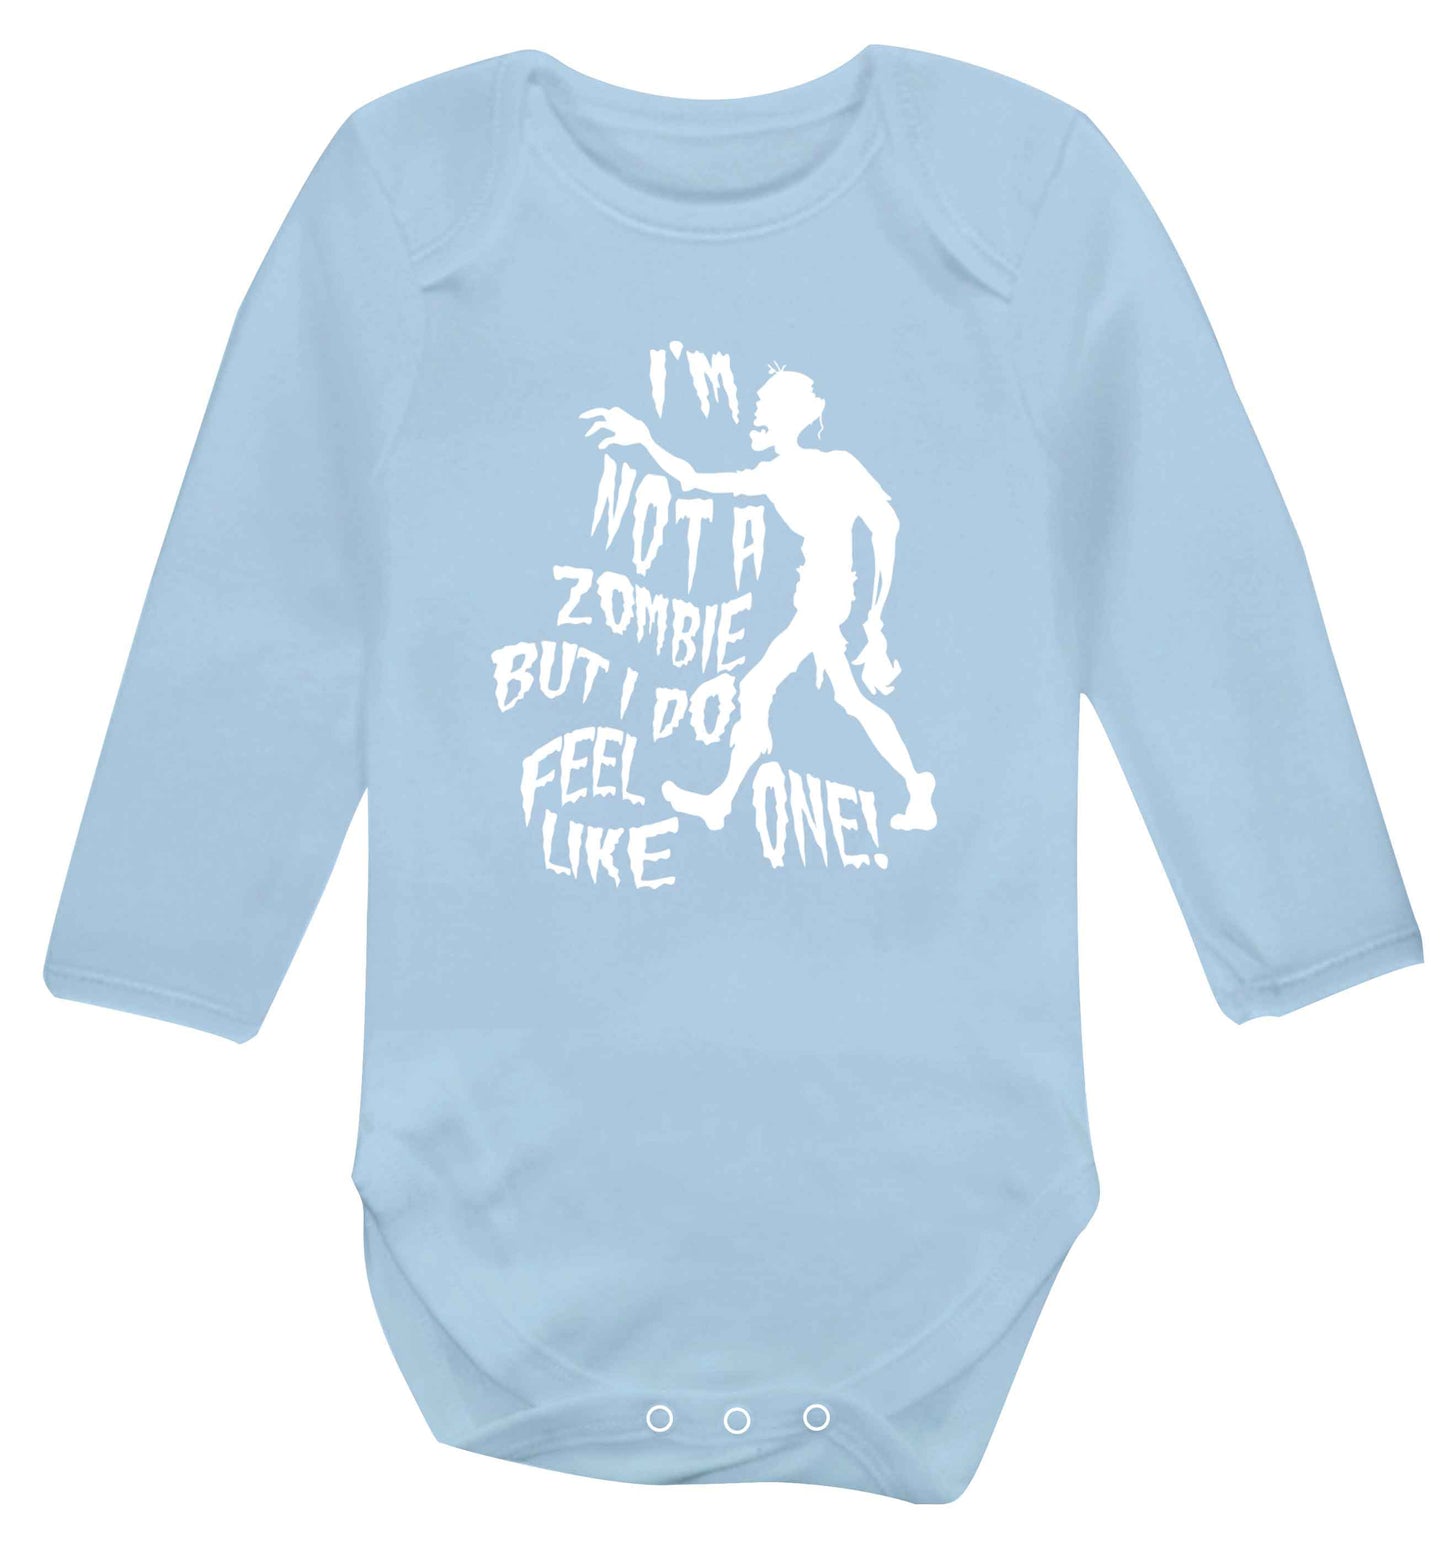 I'm not a zombie but I do feel like one! Baby Vest long sleeved pale blue 6-12 months